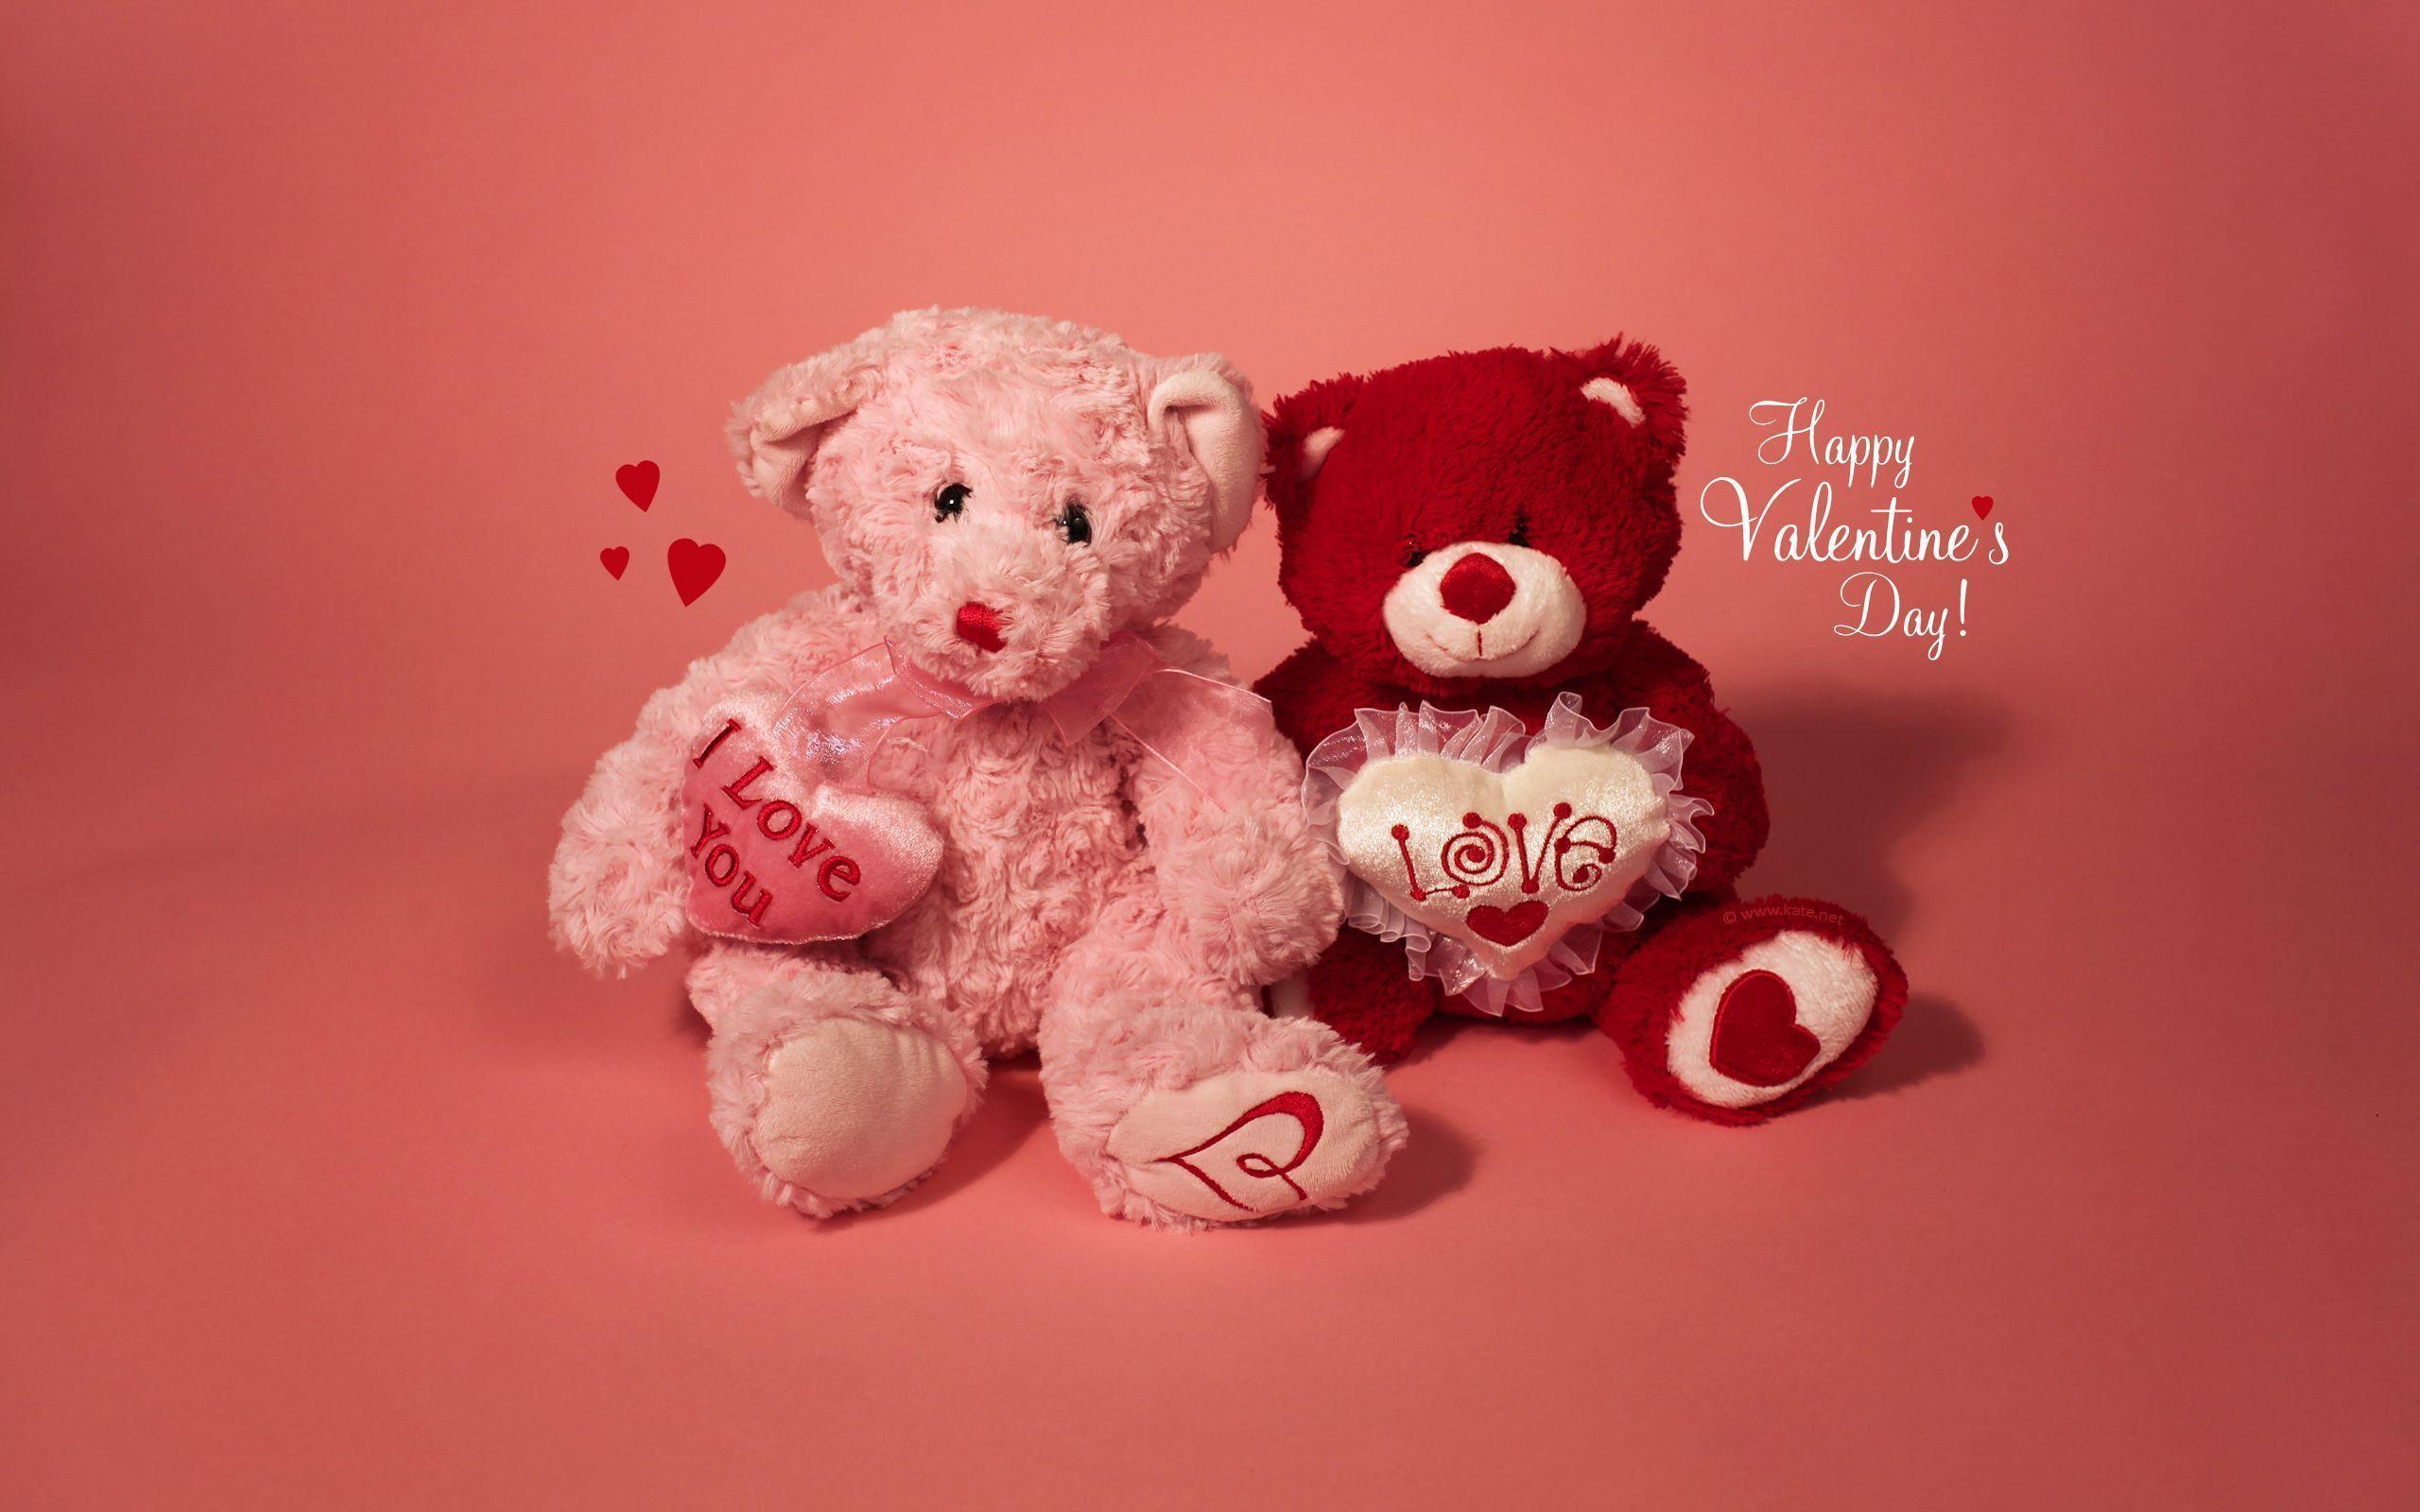 Enjoy these lovely Valentine&;s Day themed wallpaper for your Android